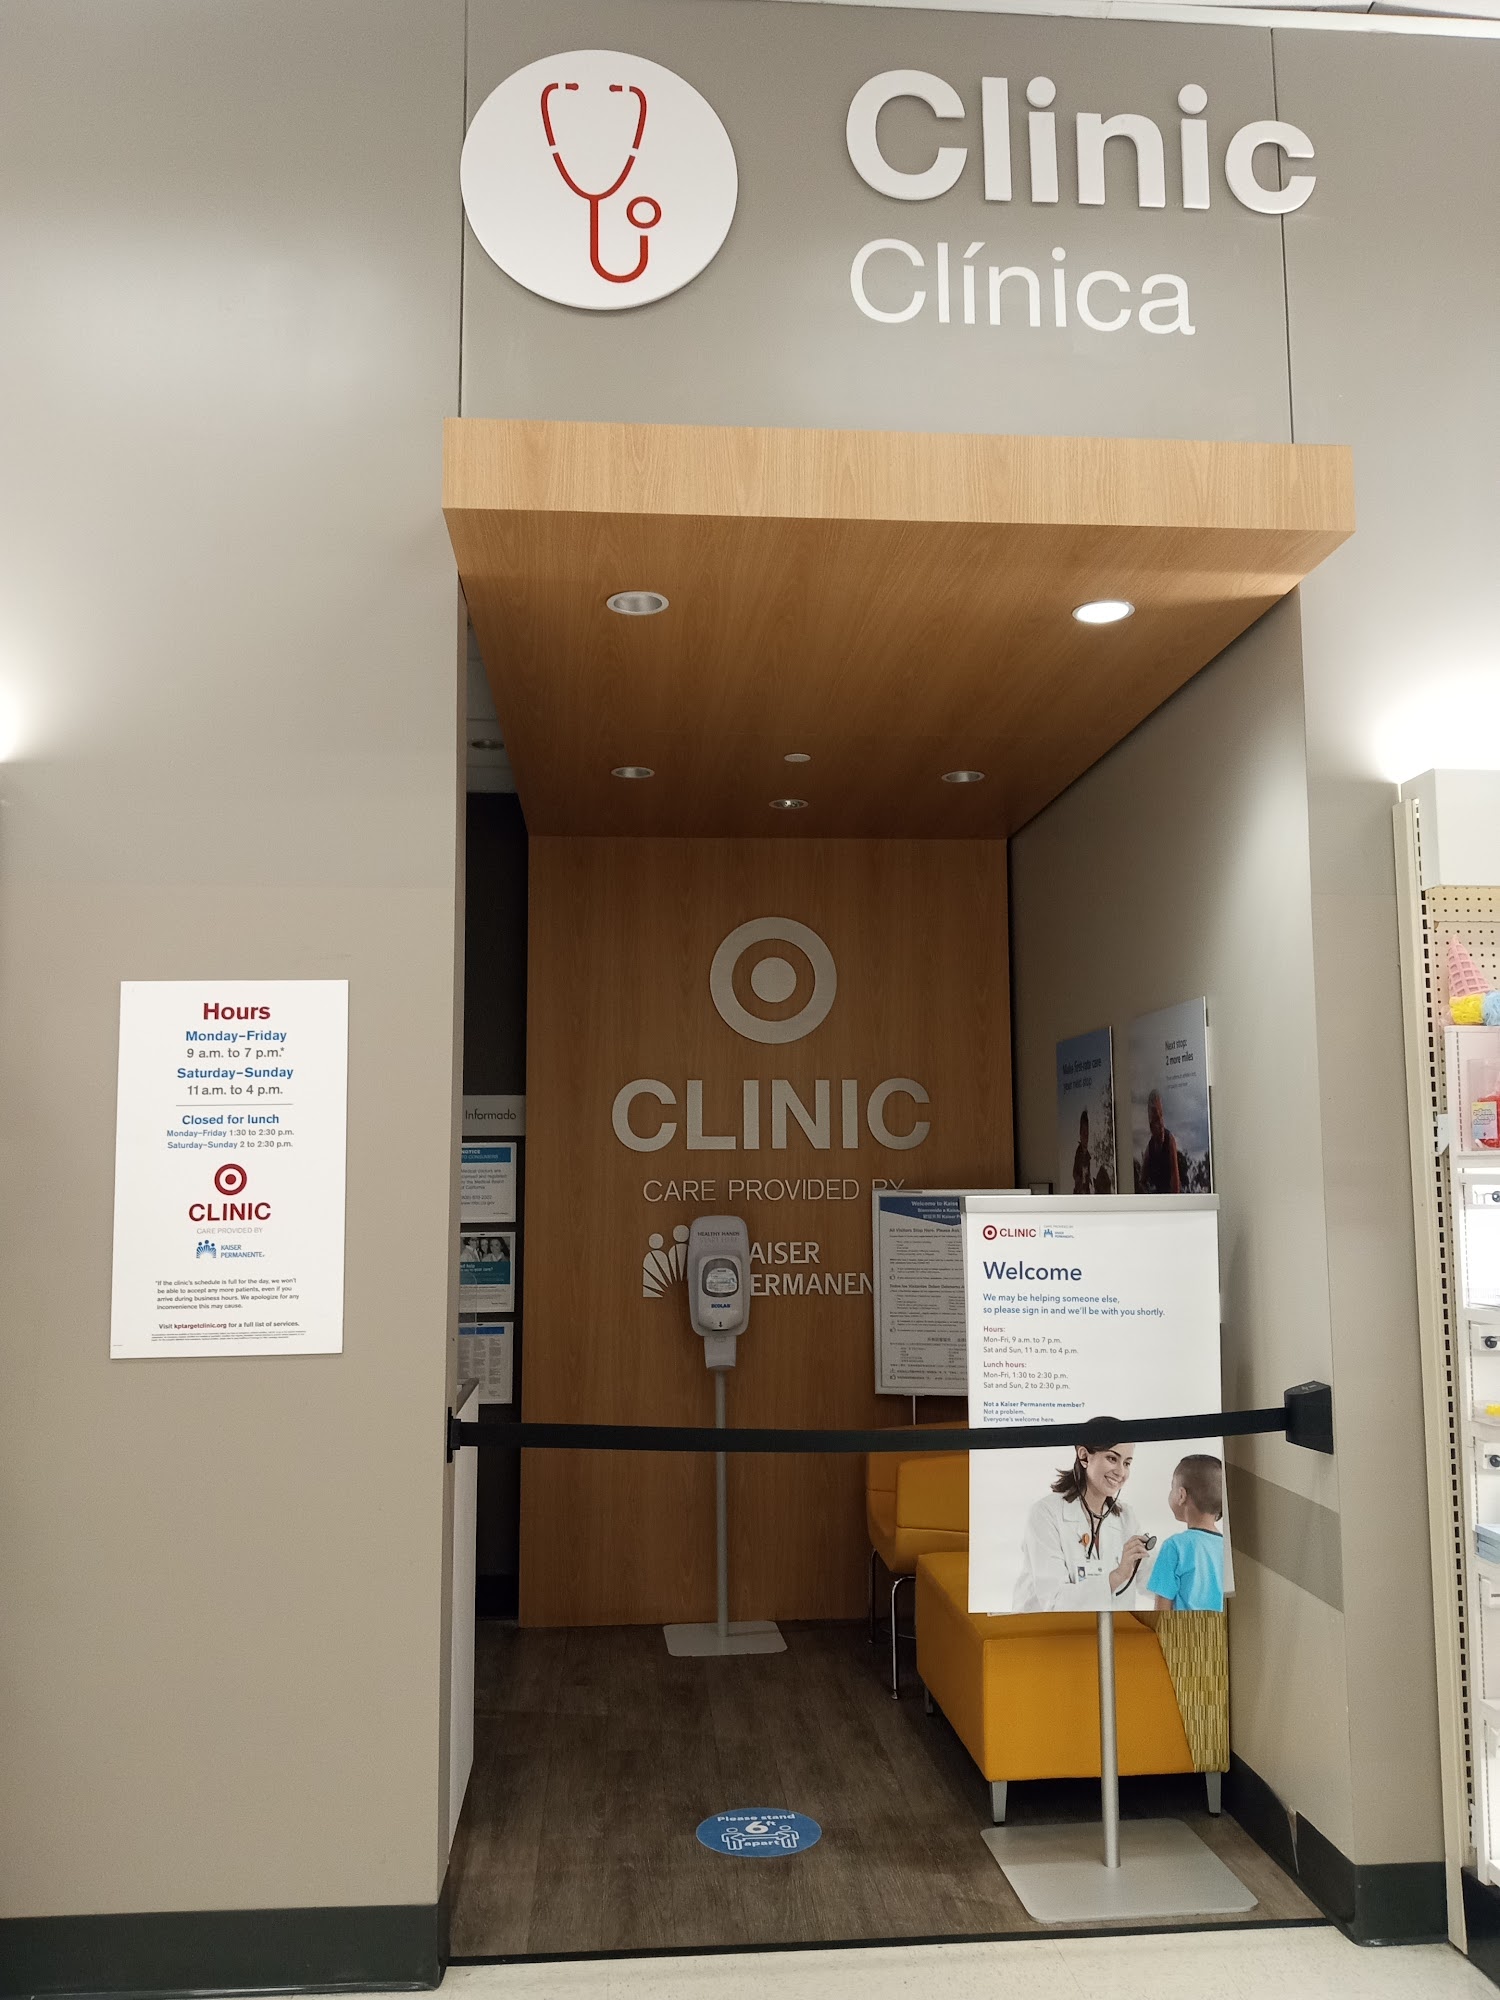 Target Clinic, care provided by Kaiser Permanente - Norco